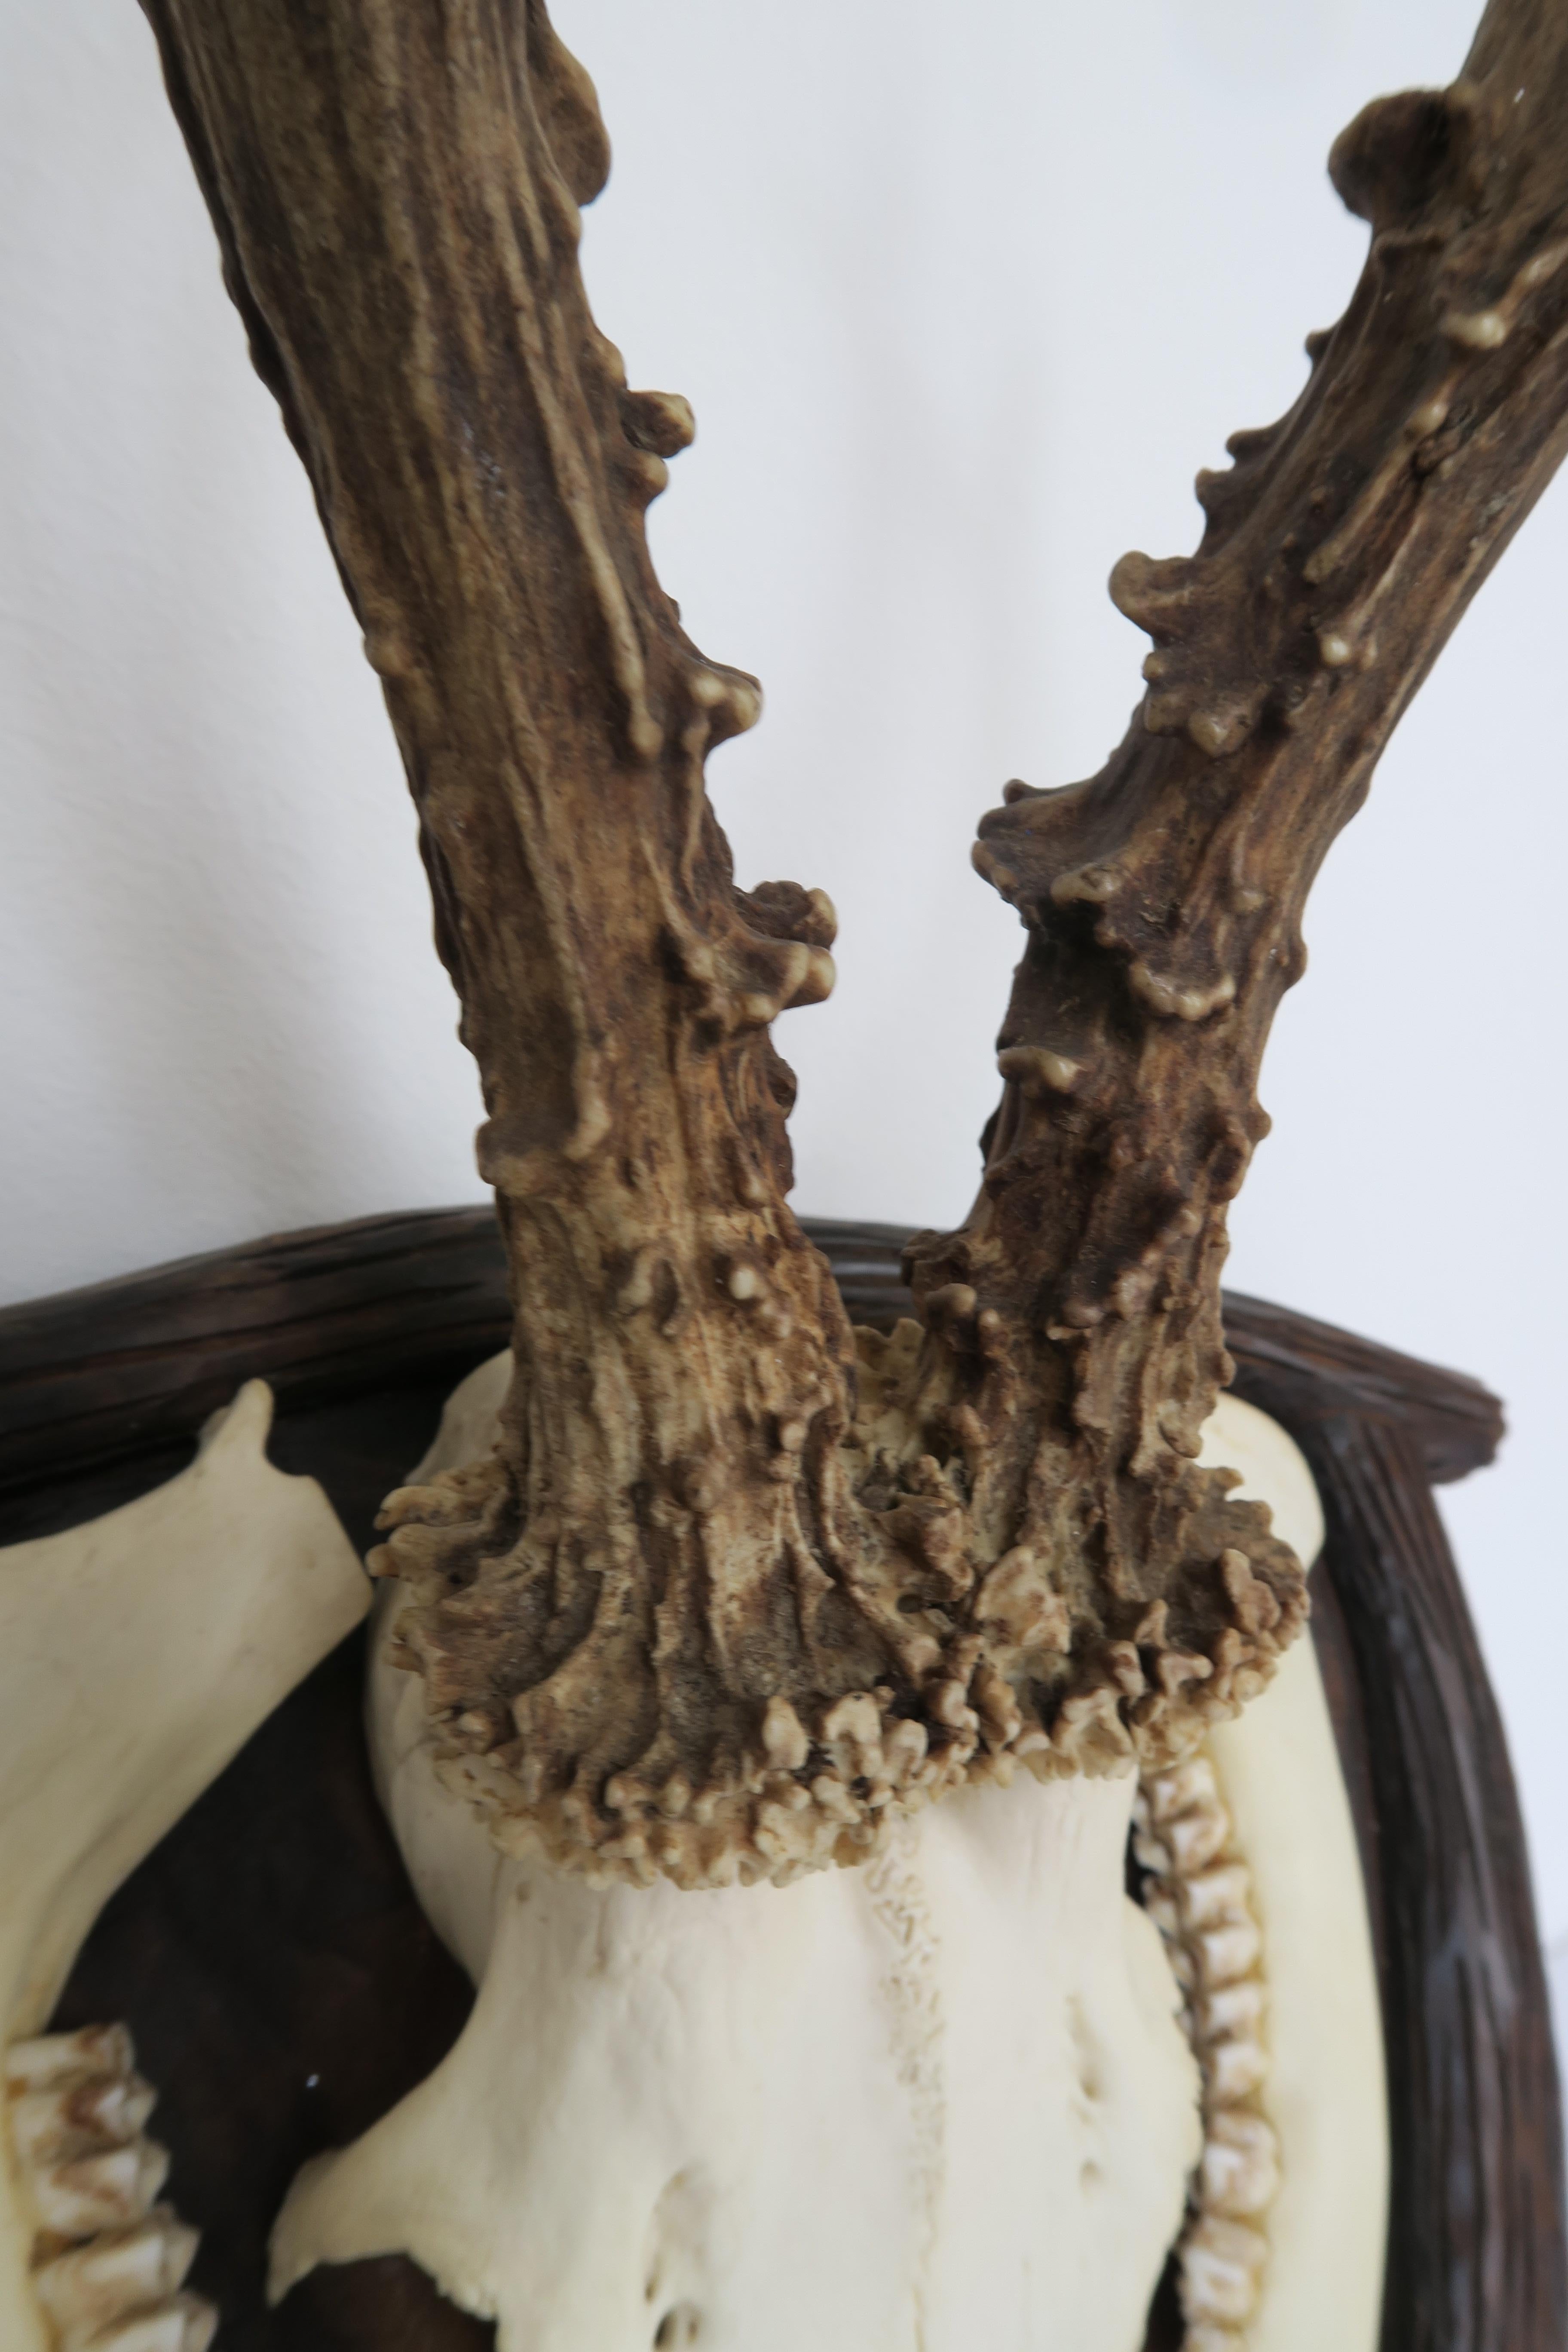 For sale is a hand carved German Black Forest Hunting Trophy. The Board has been made from Austrian nutwood and displays a set of beautiful taxidermy. The deer antlers are ca. 23.5cm long, framed by the deers lower jaw.

The object is in excellent